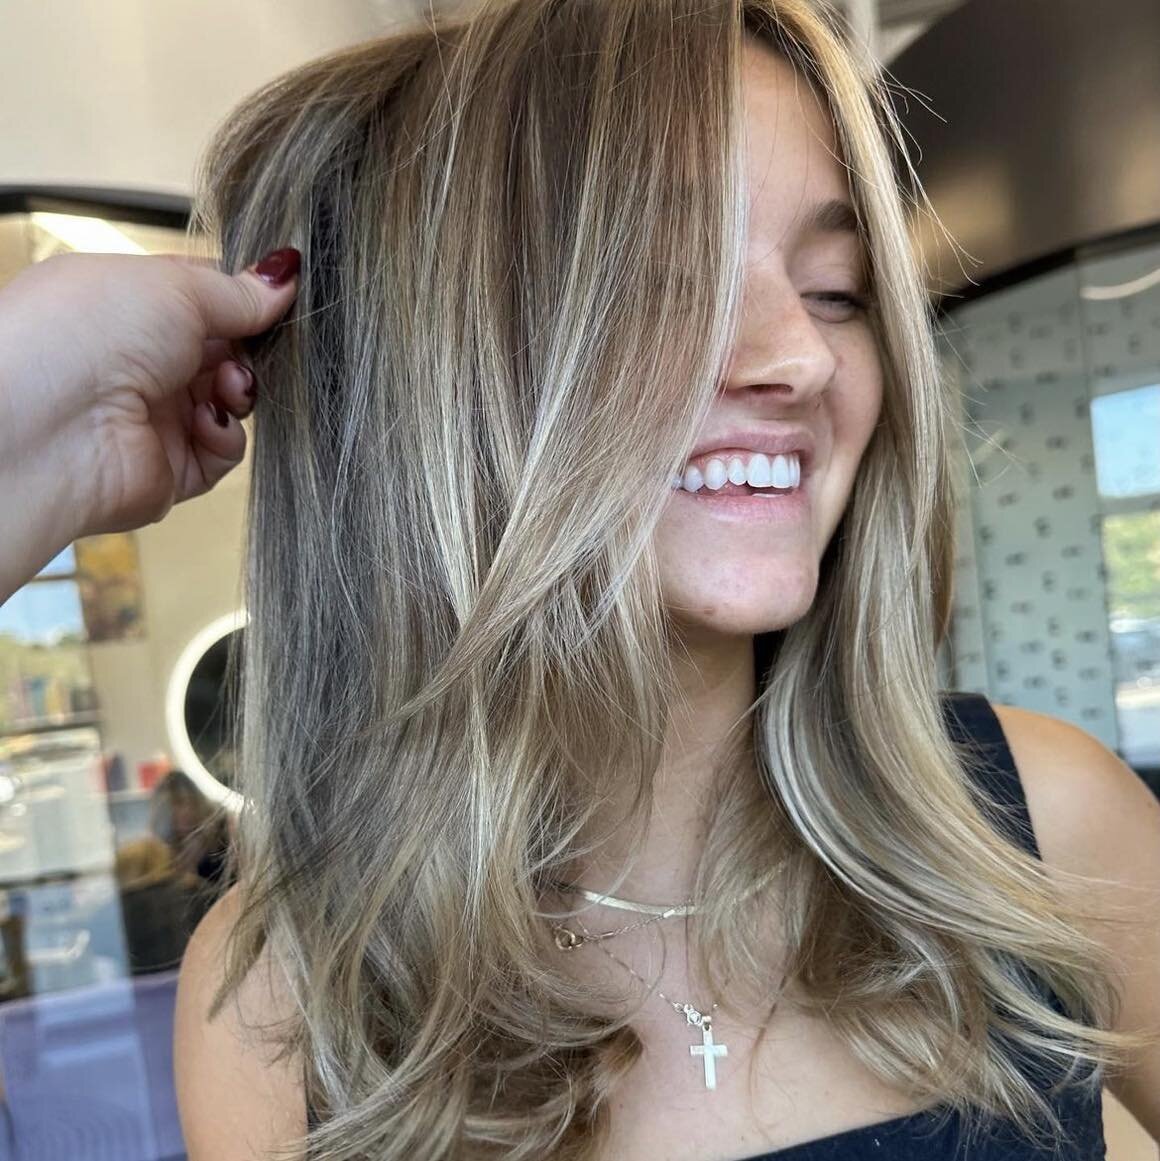 All smiles for good hair 💕

Color x @hairxxlaurenn ✨ She&rsquo;s accepting new guests for the holidays! Click the link in our bio to book with her today! 

#charlottehair #charlottehairstylist #charlotteblondes #charlottesalon #charlotteextensions #